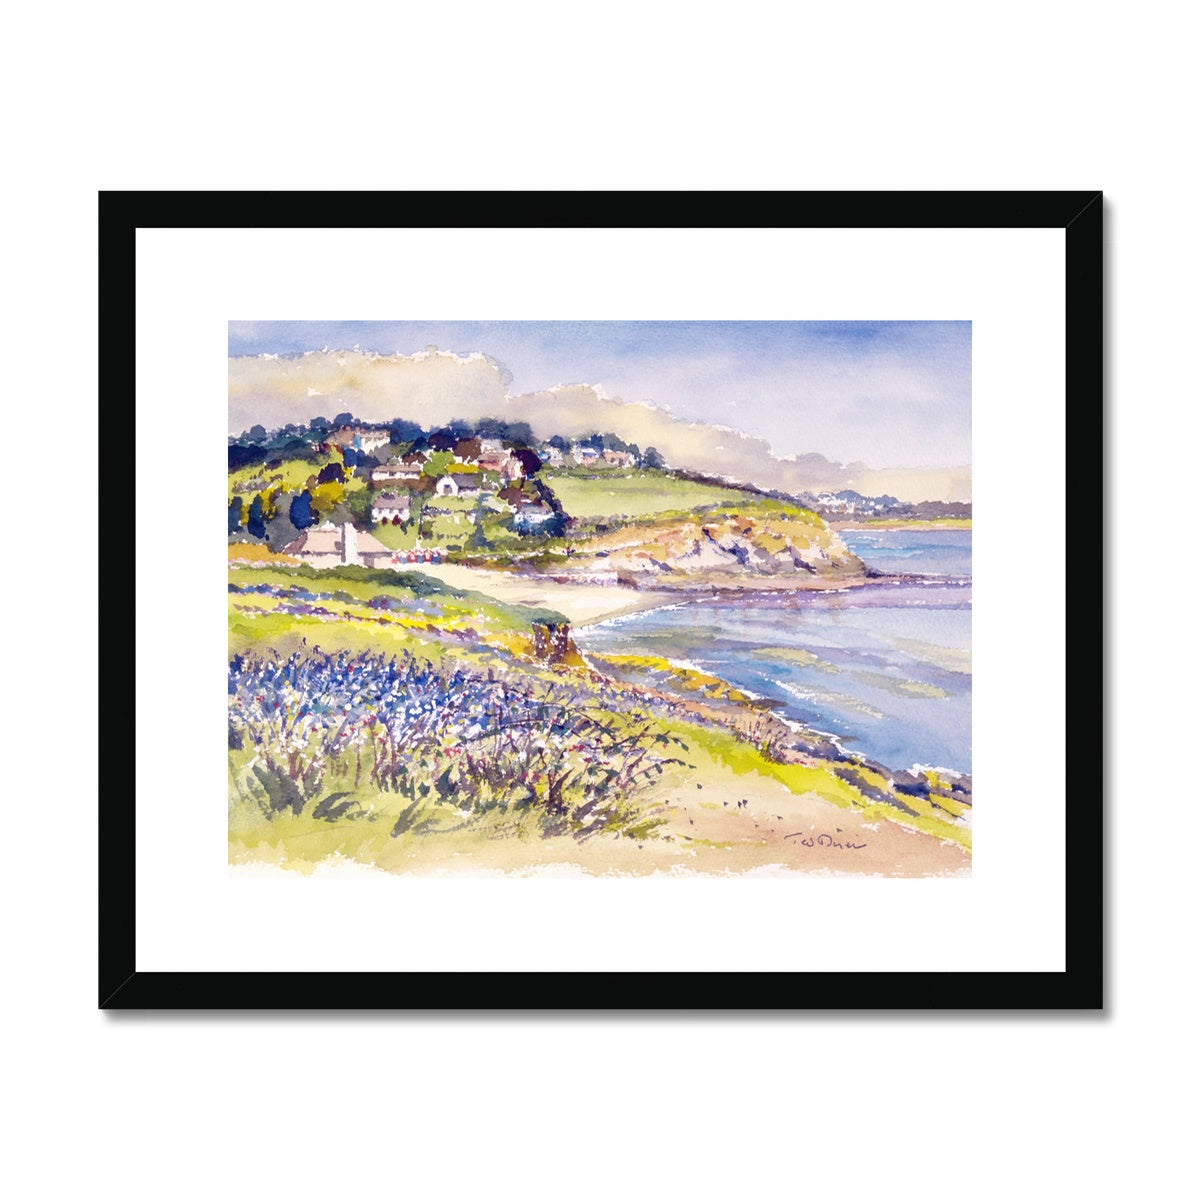 Ted Dyer Framed Open Edition Cornish Fine Art Print. 'Bluebells on the Cliff, Swanpool'. Cornwall Art Gallery